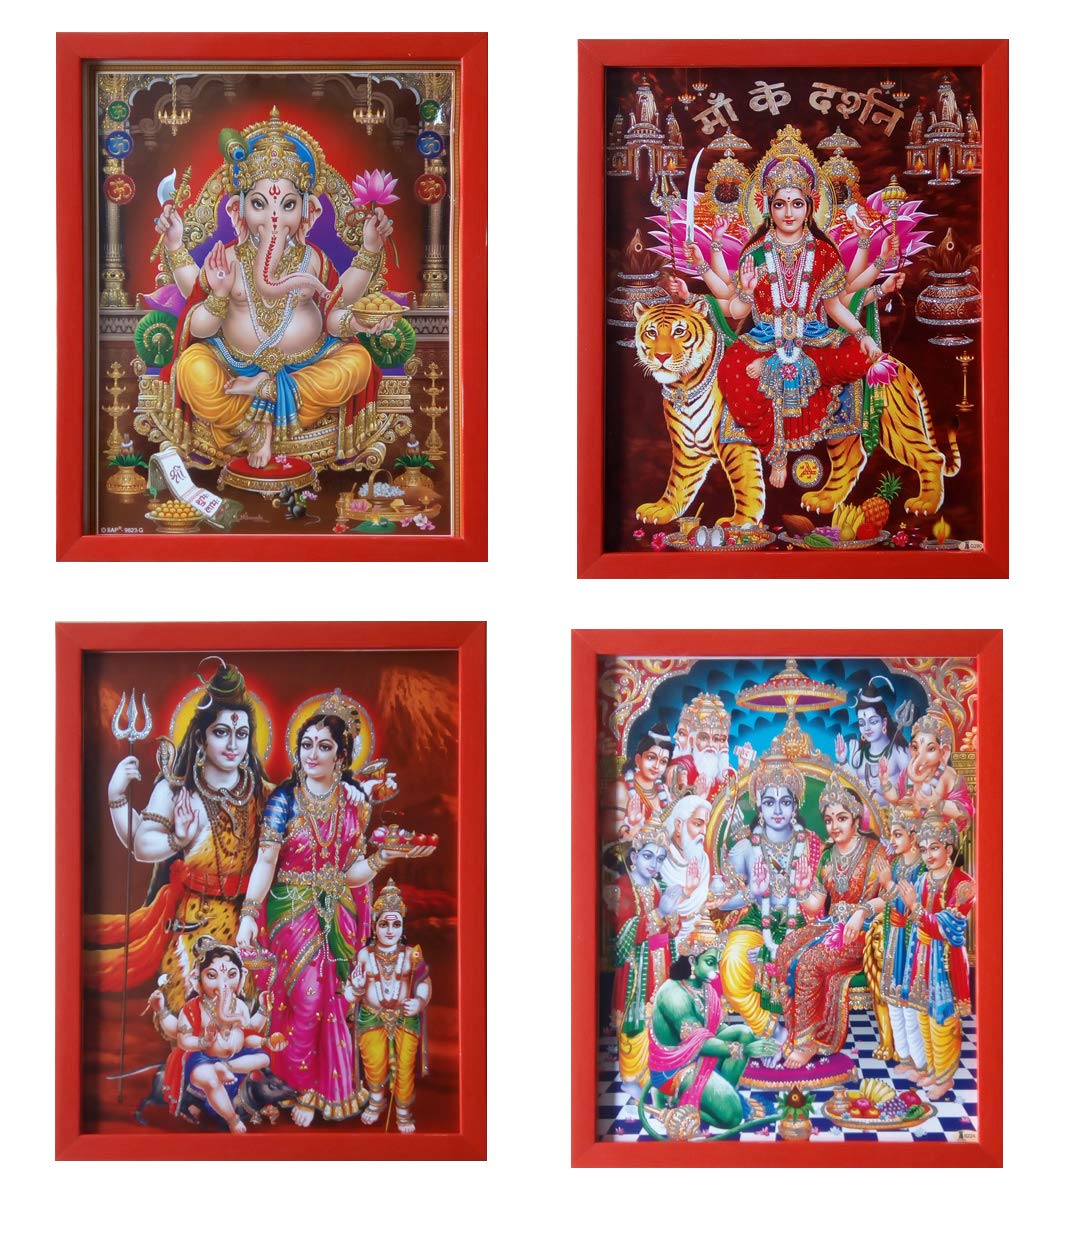 Buy Shree Handicraft Lord Ganesha Painting Frame Ramdarbar with Durga Maa Shiva Shiv Parivar Photo Frames Set of 5 (Each Size: 24 x 30 x 1 cm) Online at Low Prices in India